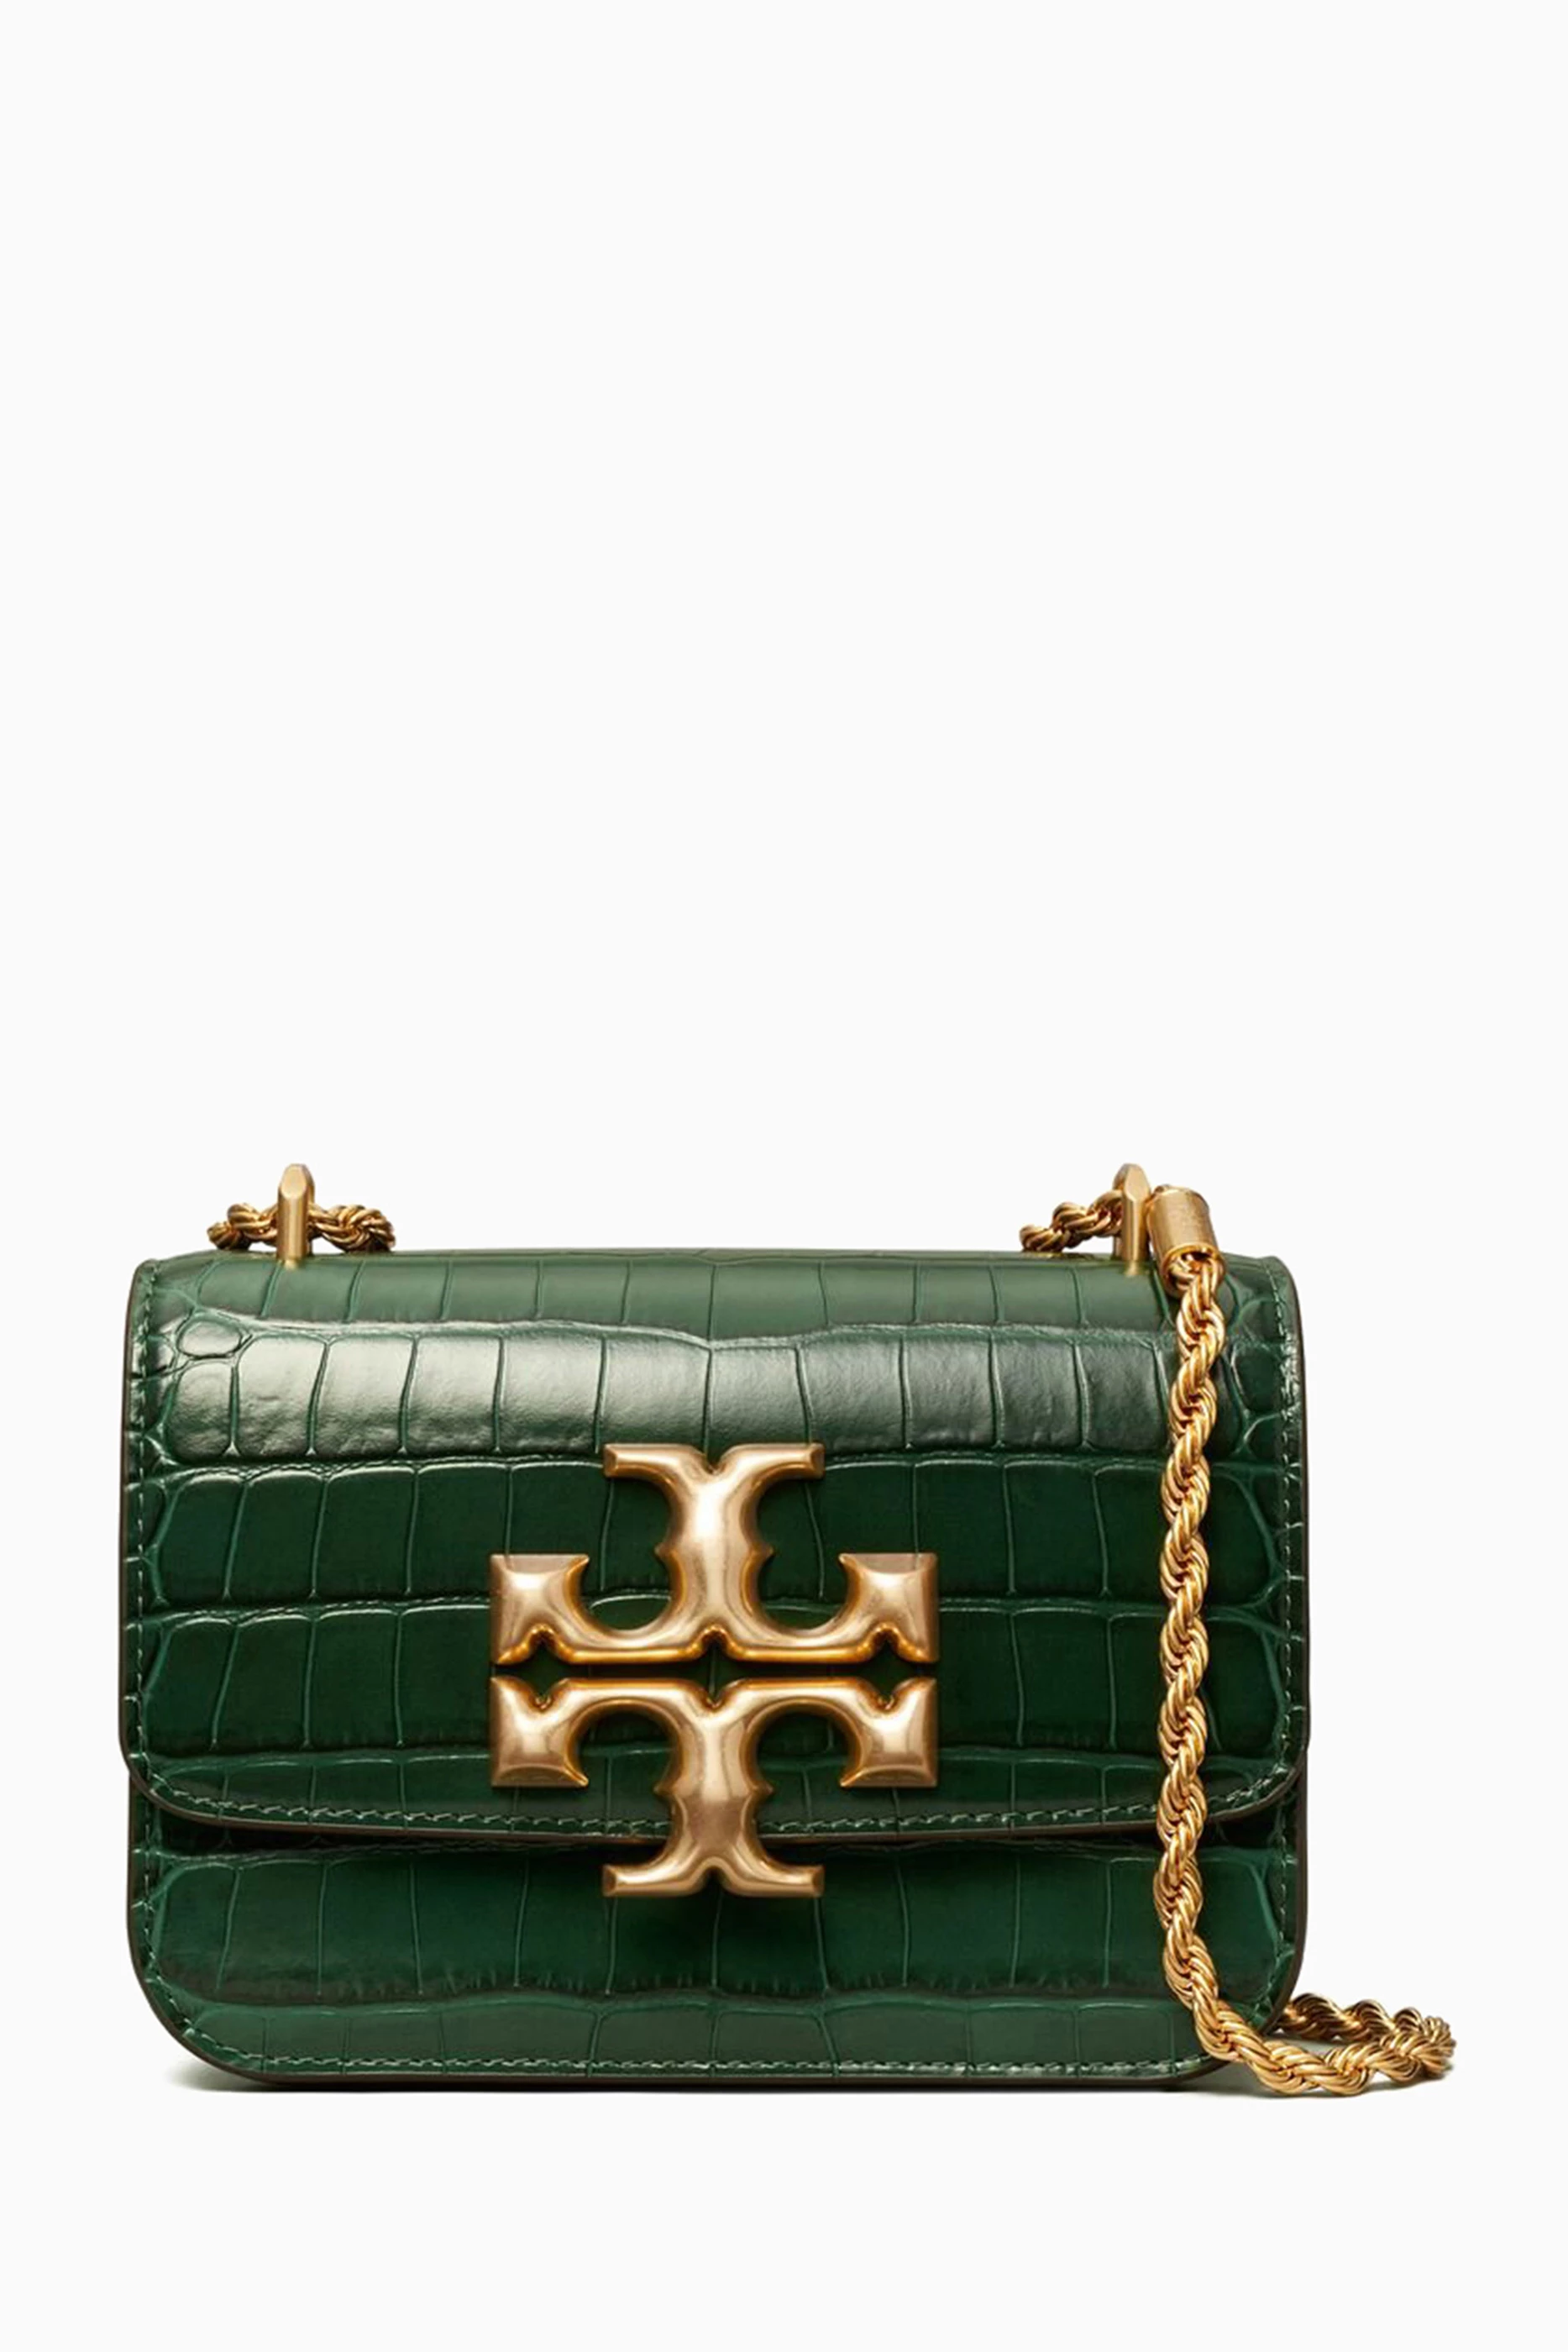 Shop Tory Burch Green Eleanor Bag in Croc-embossed Leather for WOMEN |  Ounass Bahrain